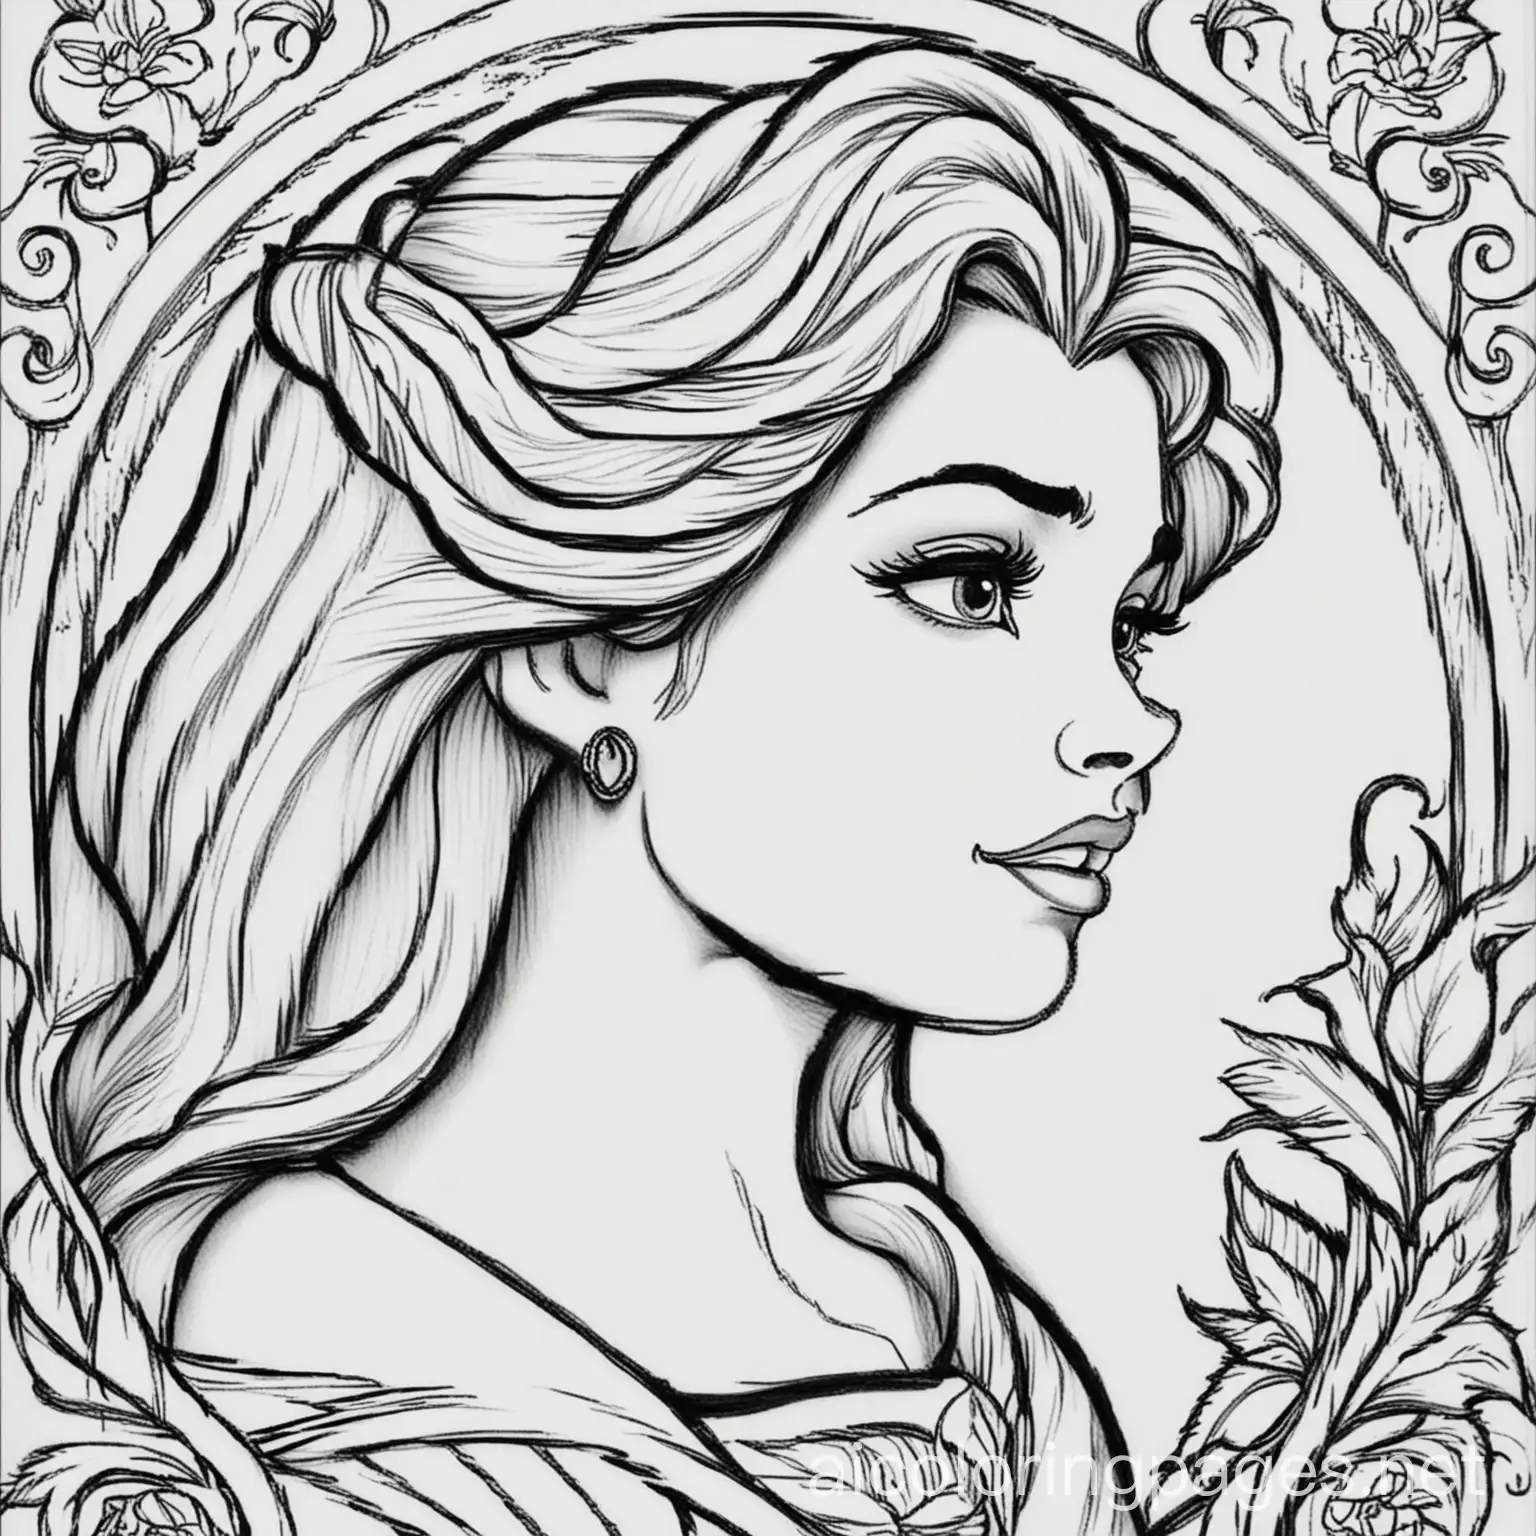 Beauty and the beast, Coloring Page, black and white, line art, white background, Simplicity, Ample White Space. The background of the coloring page is plain white to make it easy for young children to color within the lines. The outlines of all the subjects are easy to distinguish, making it simple for kids to color without too much difficulty